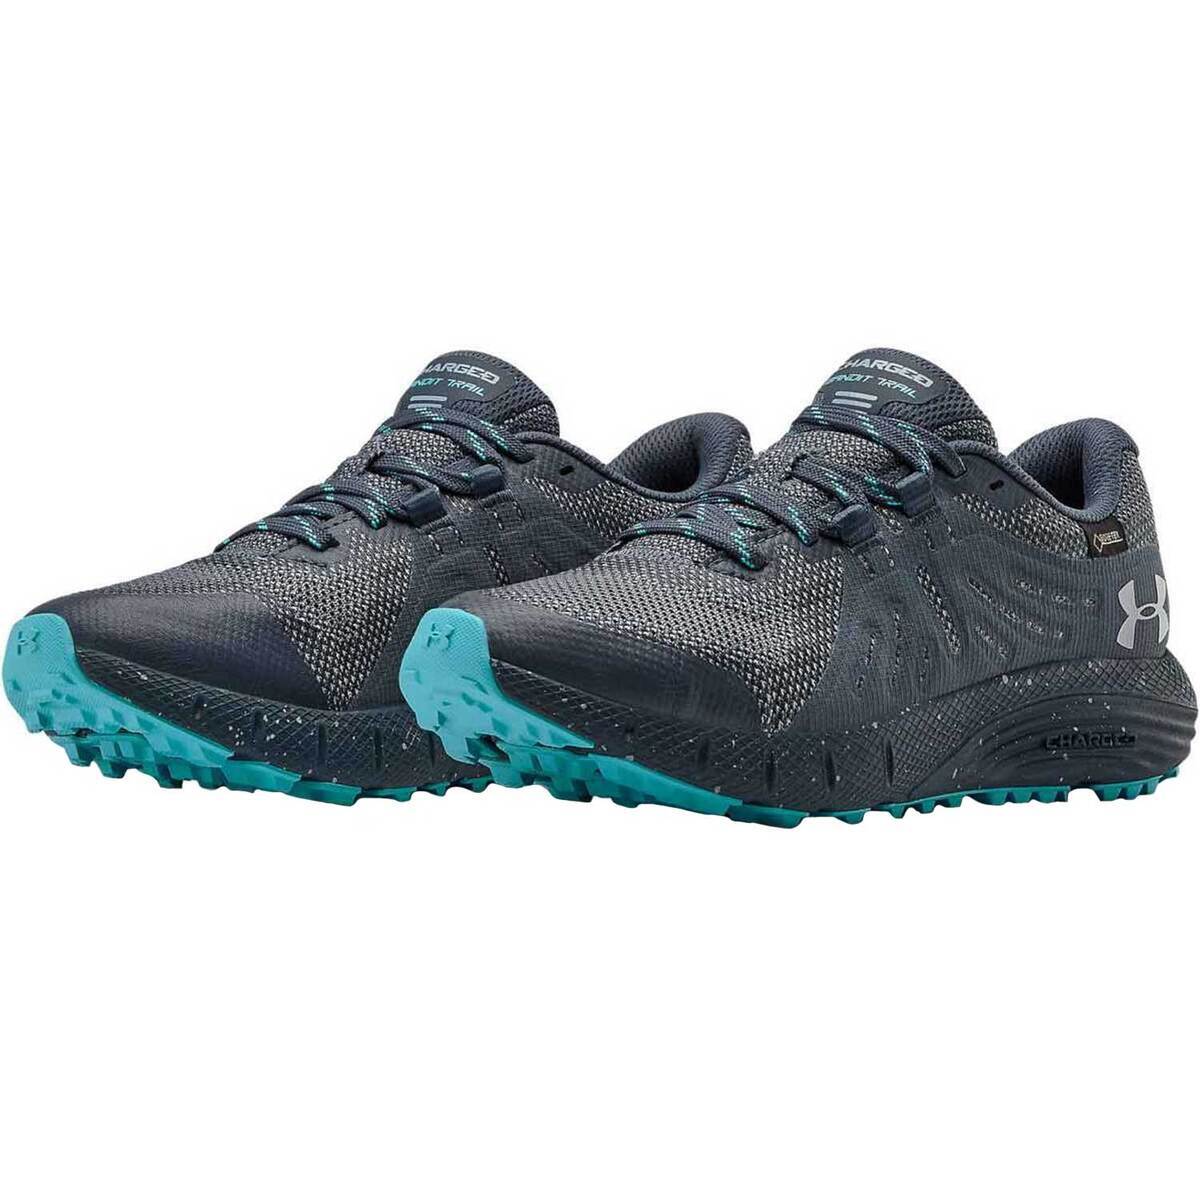 Under Armour Women's Charged Bandit Trail Waterproof Trail Running ...